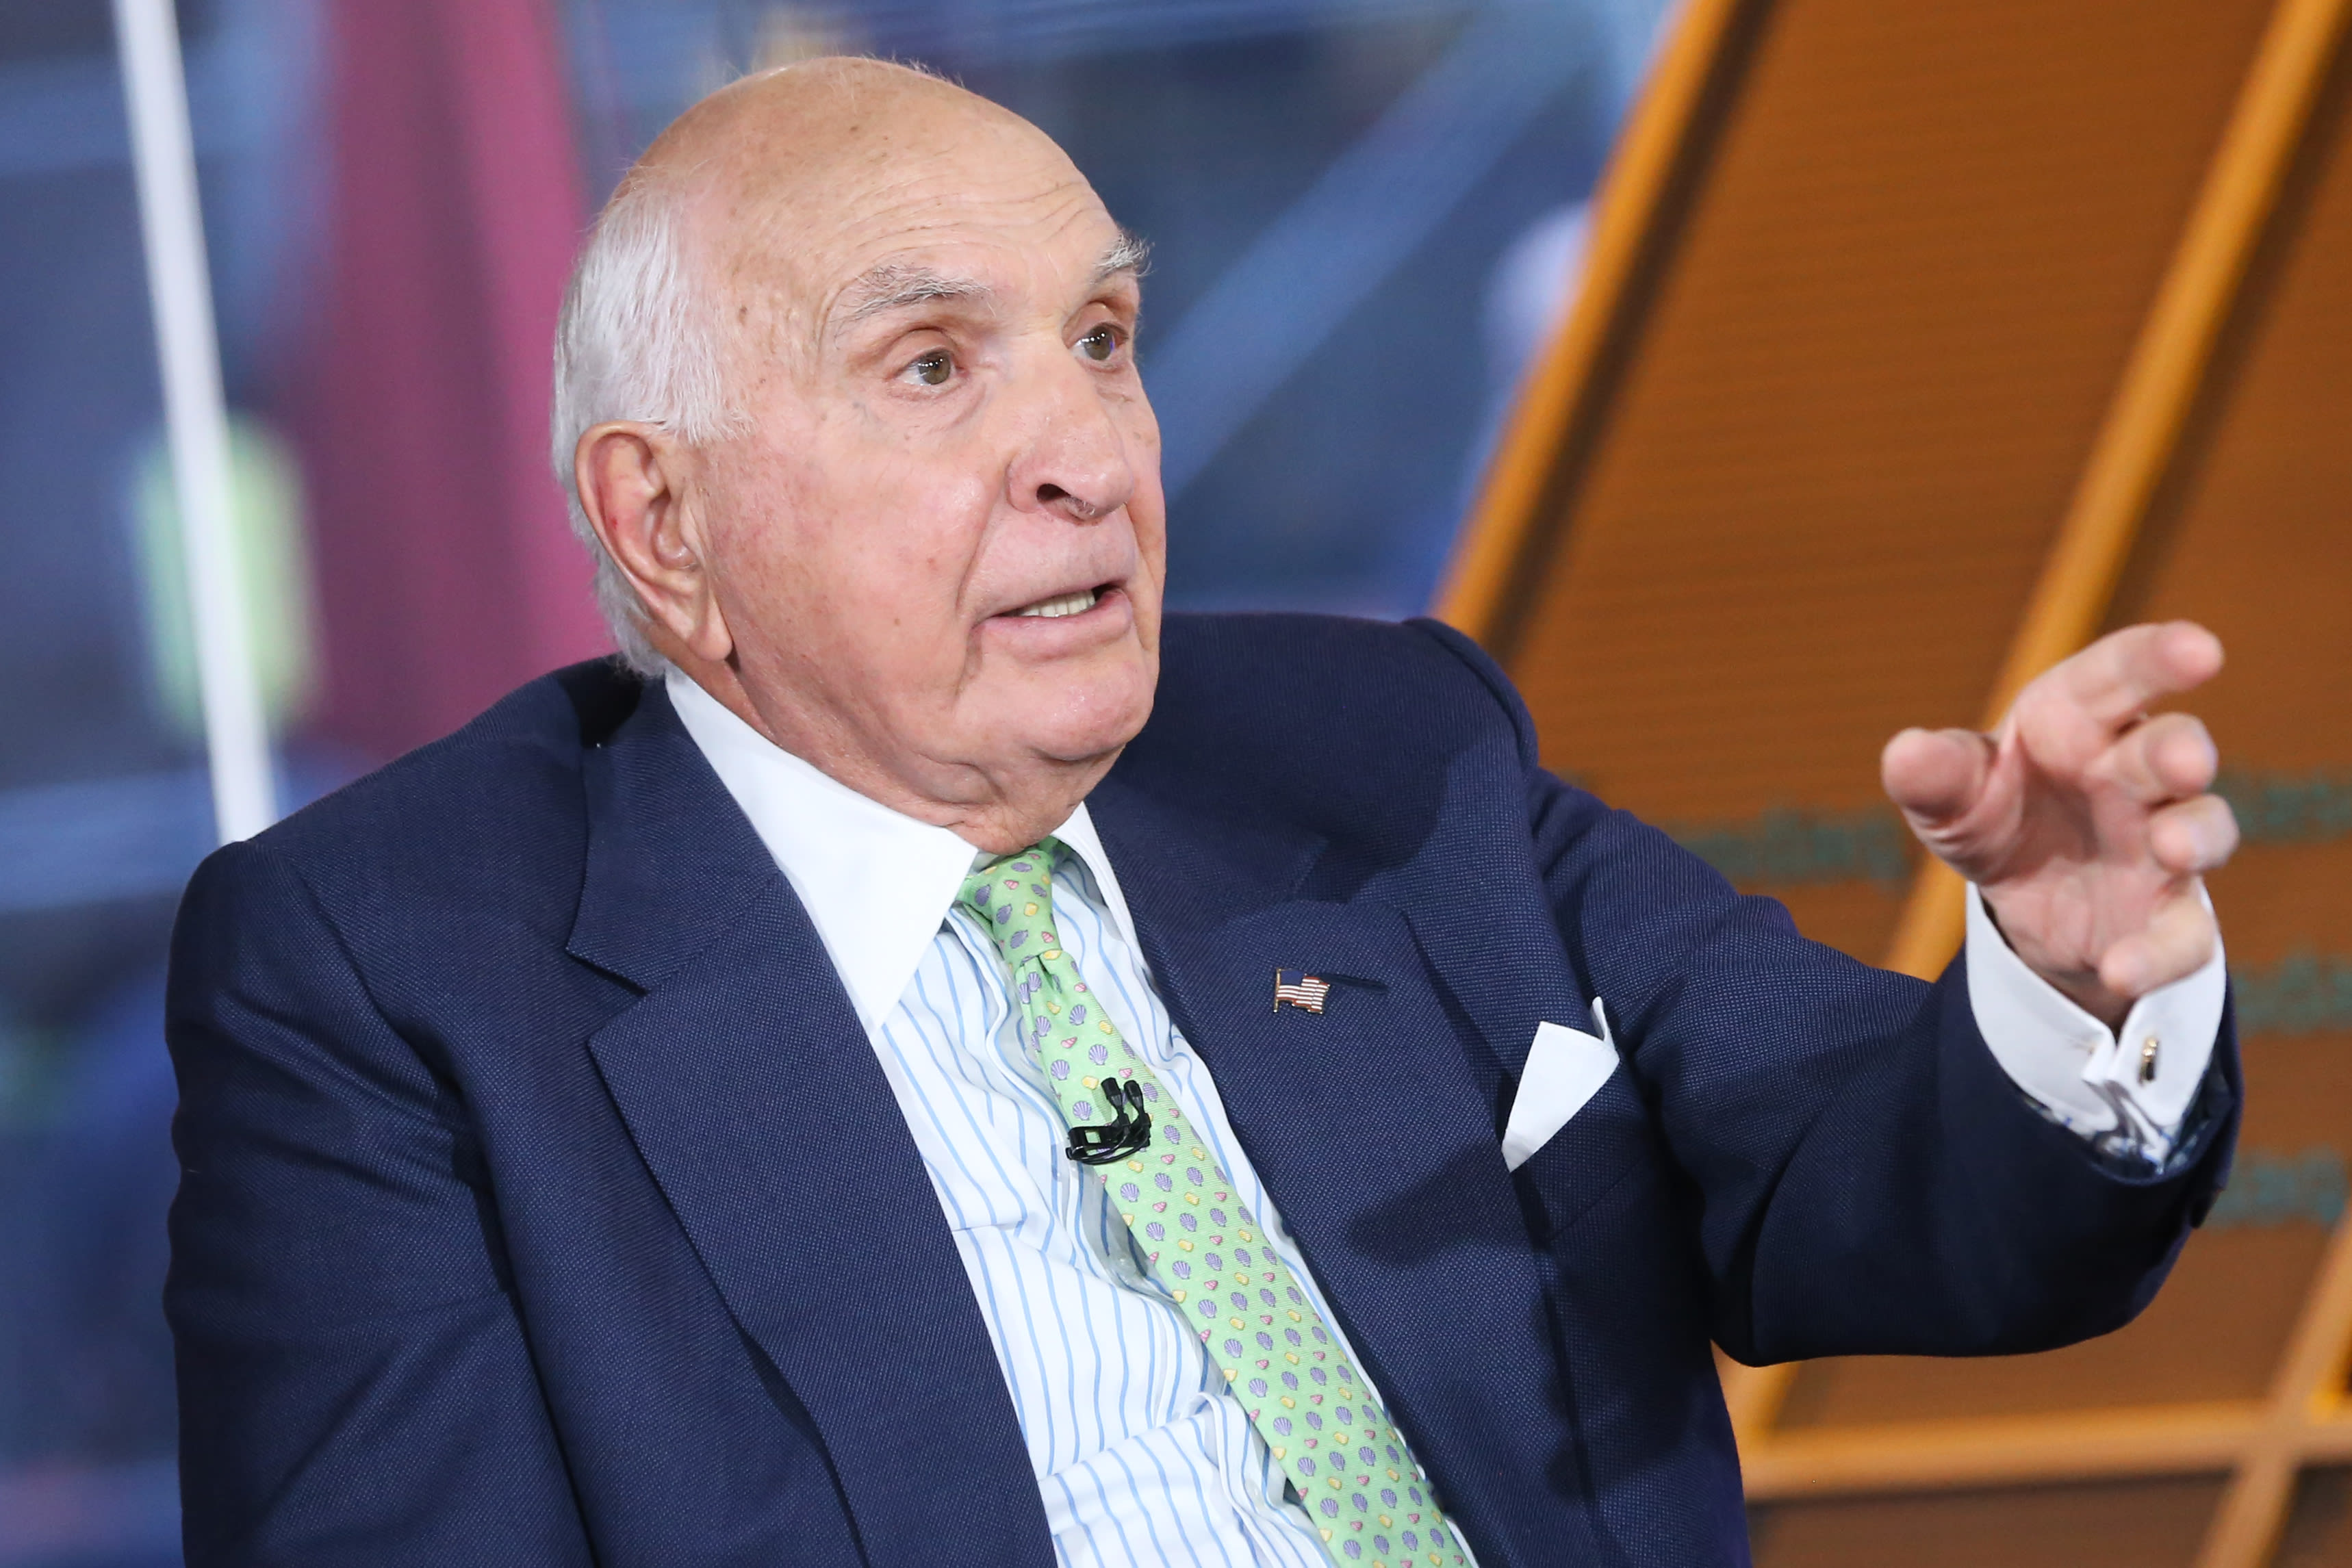 Ken Langone talks about shares he likes, together with JP Morgan and GE